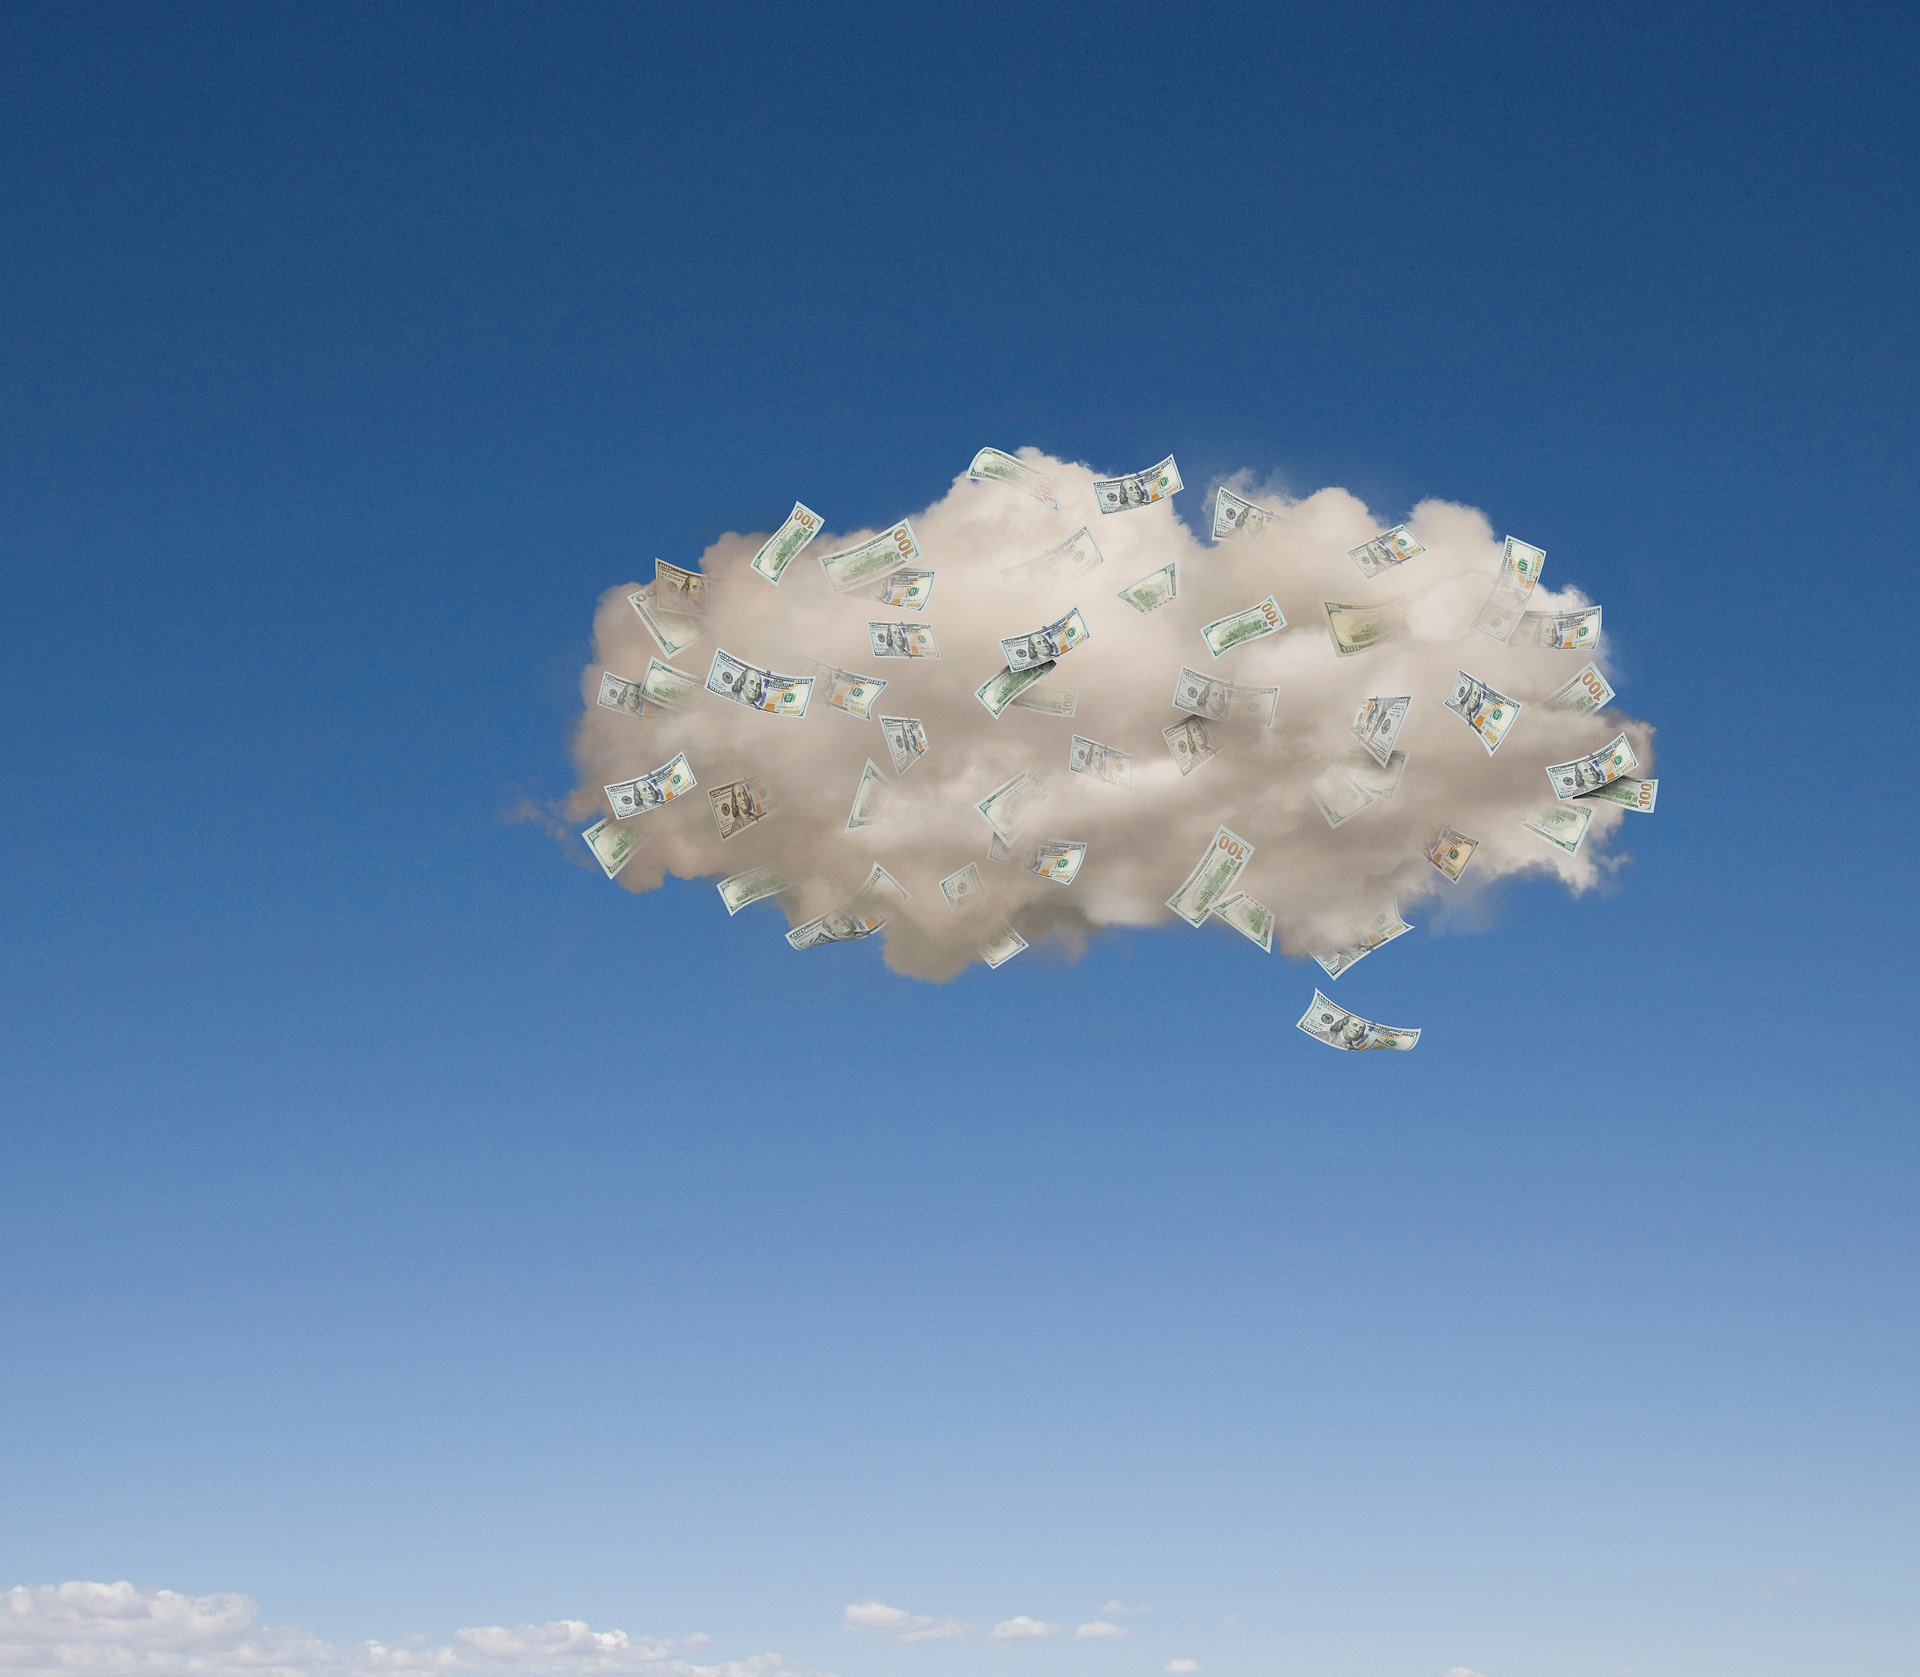 Image of money floating in a cloud against a blue sky.